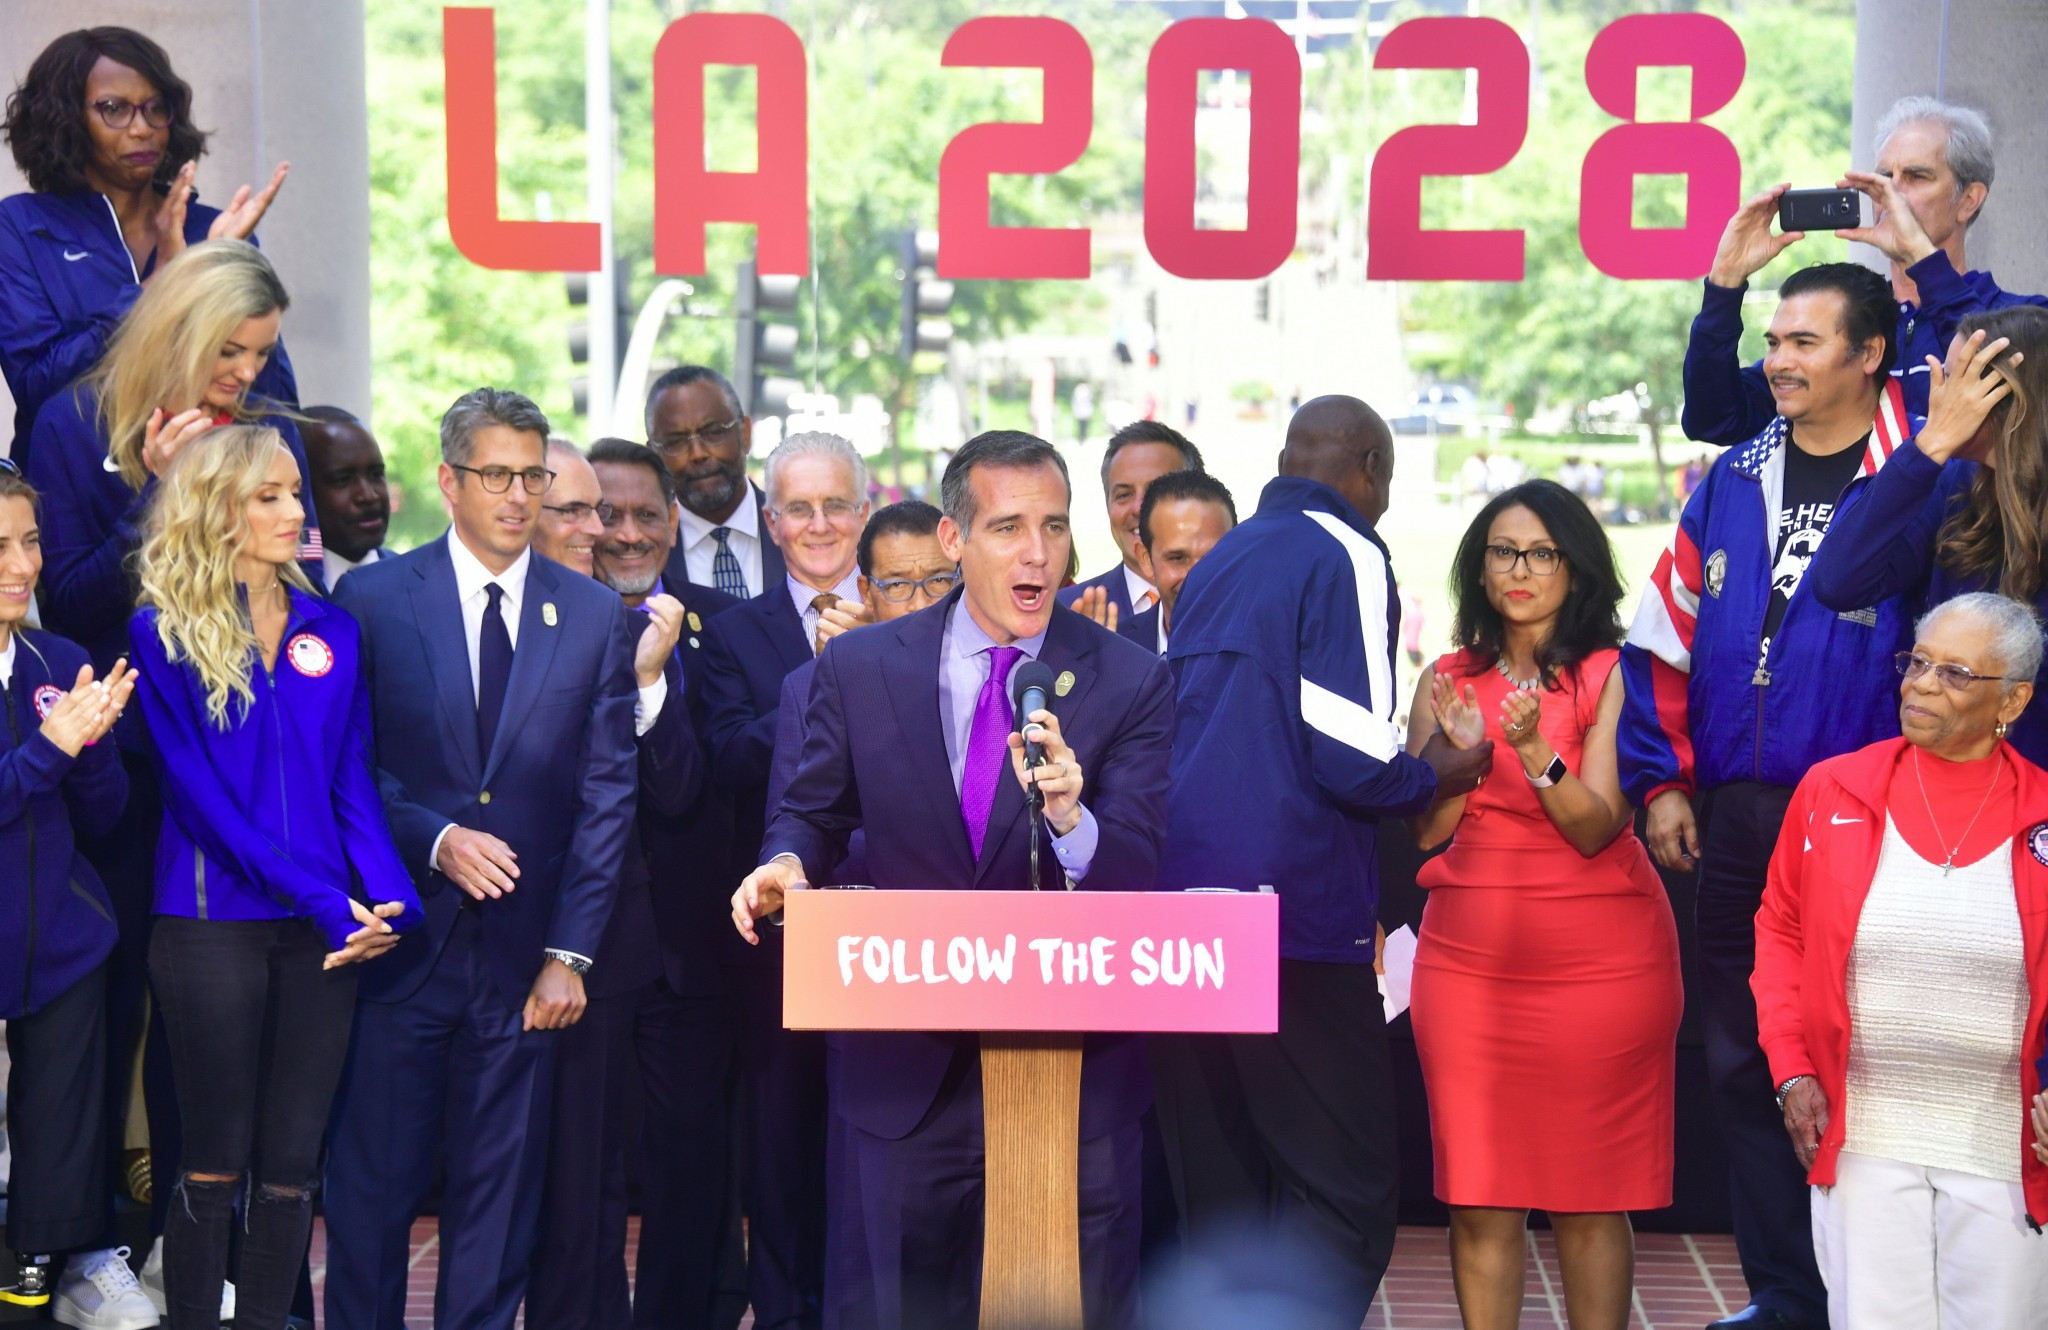 Los Angeles has agreed to host the later Olympics and Paralympics in 2028 ©Getty Images